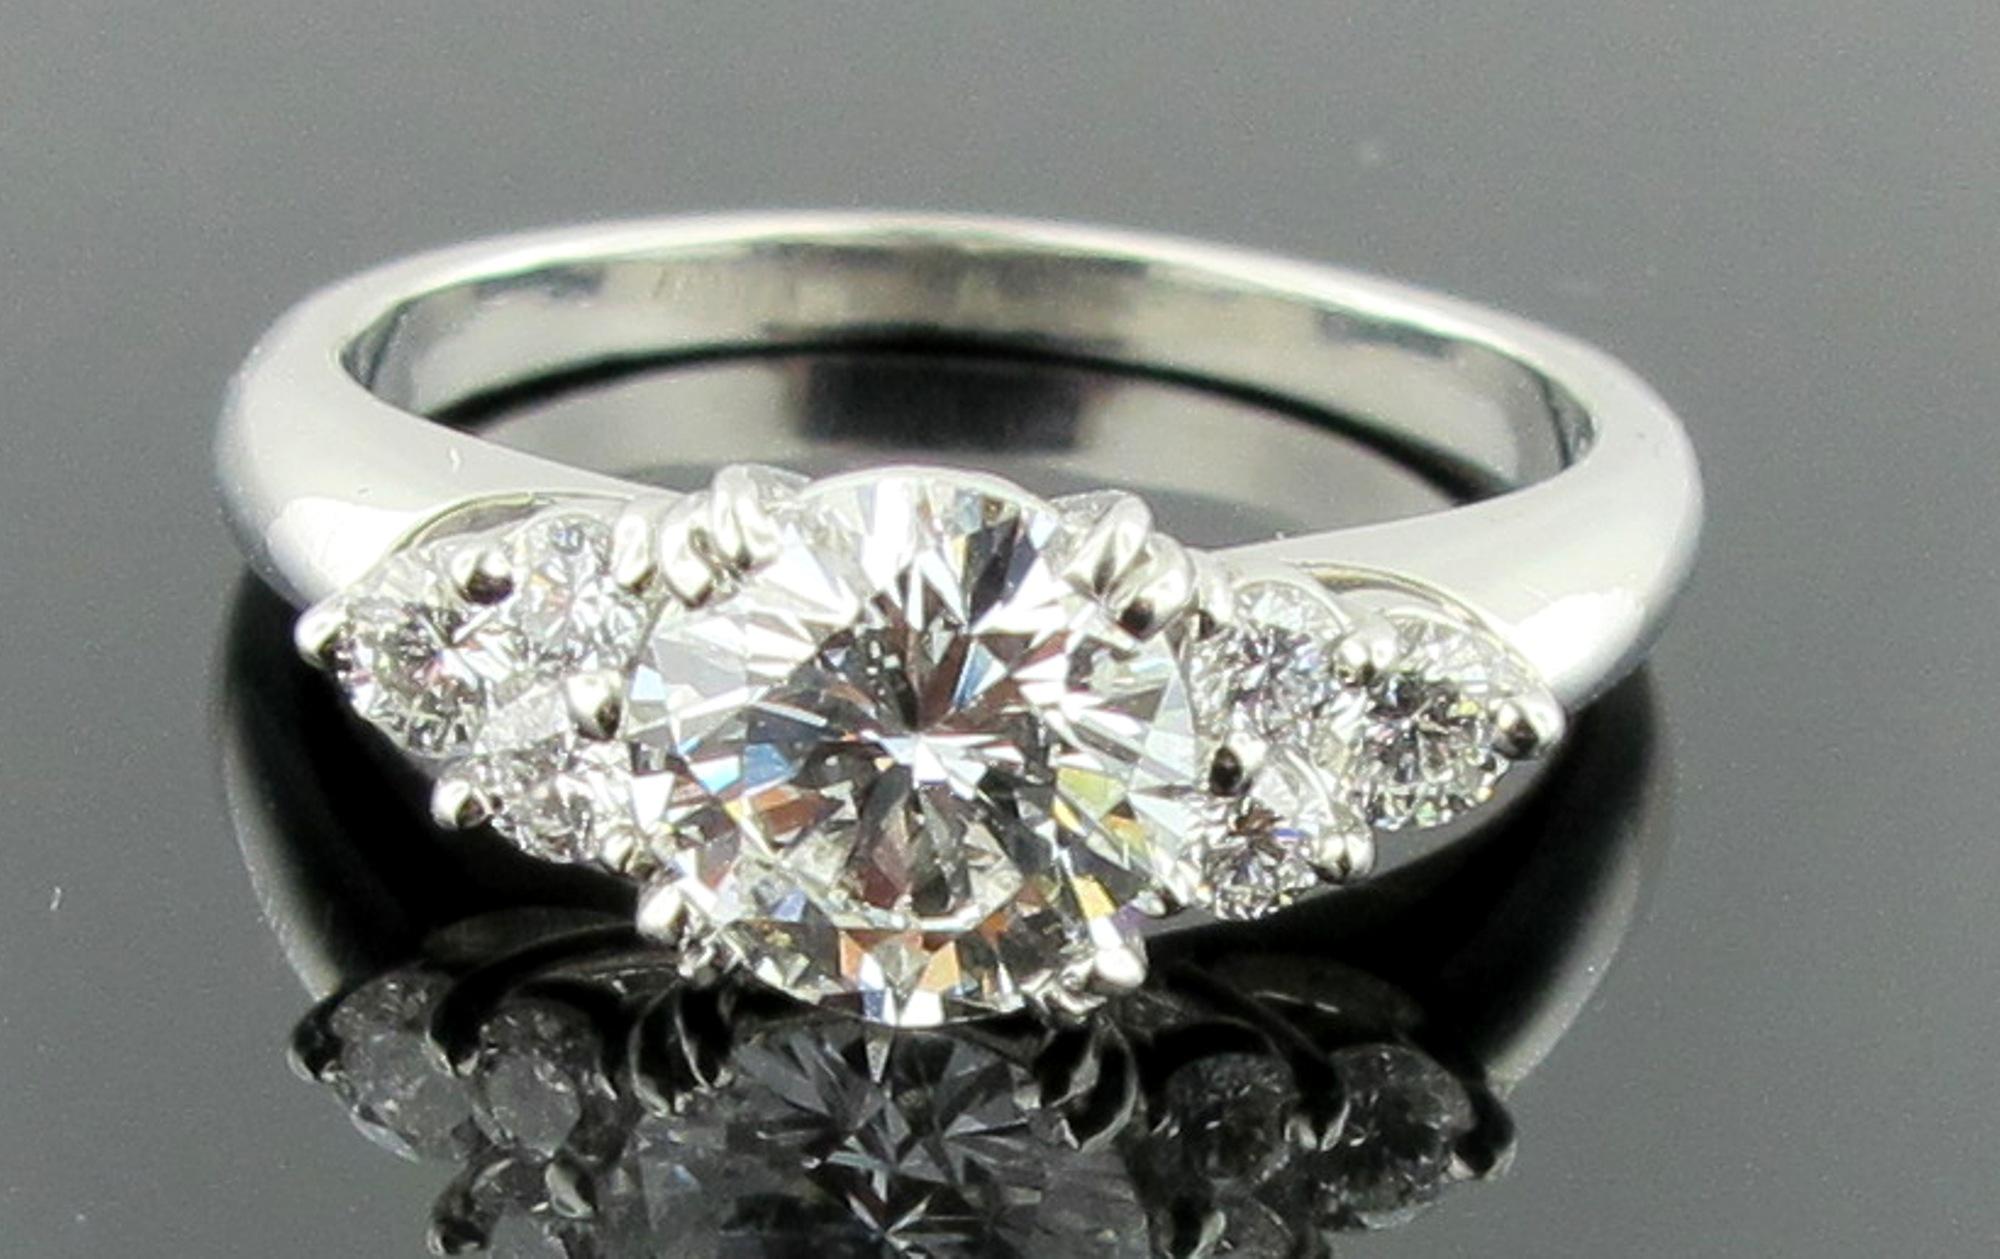 Set in Platinum is a 1.02 carat center round brilliant cut diamond, H Color, SI Clarity.  Along side are 6 round brilliant cut diamonds with a total weight of 0.25.  Total diamond weight is 1.27 carats.  Ring size is 6.